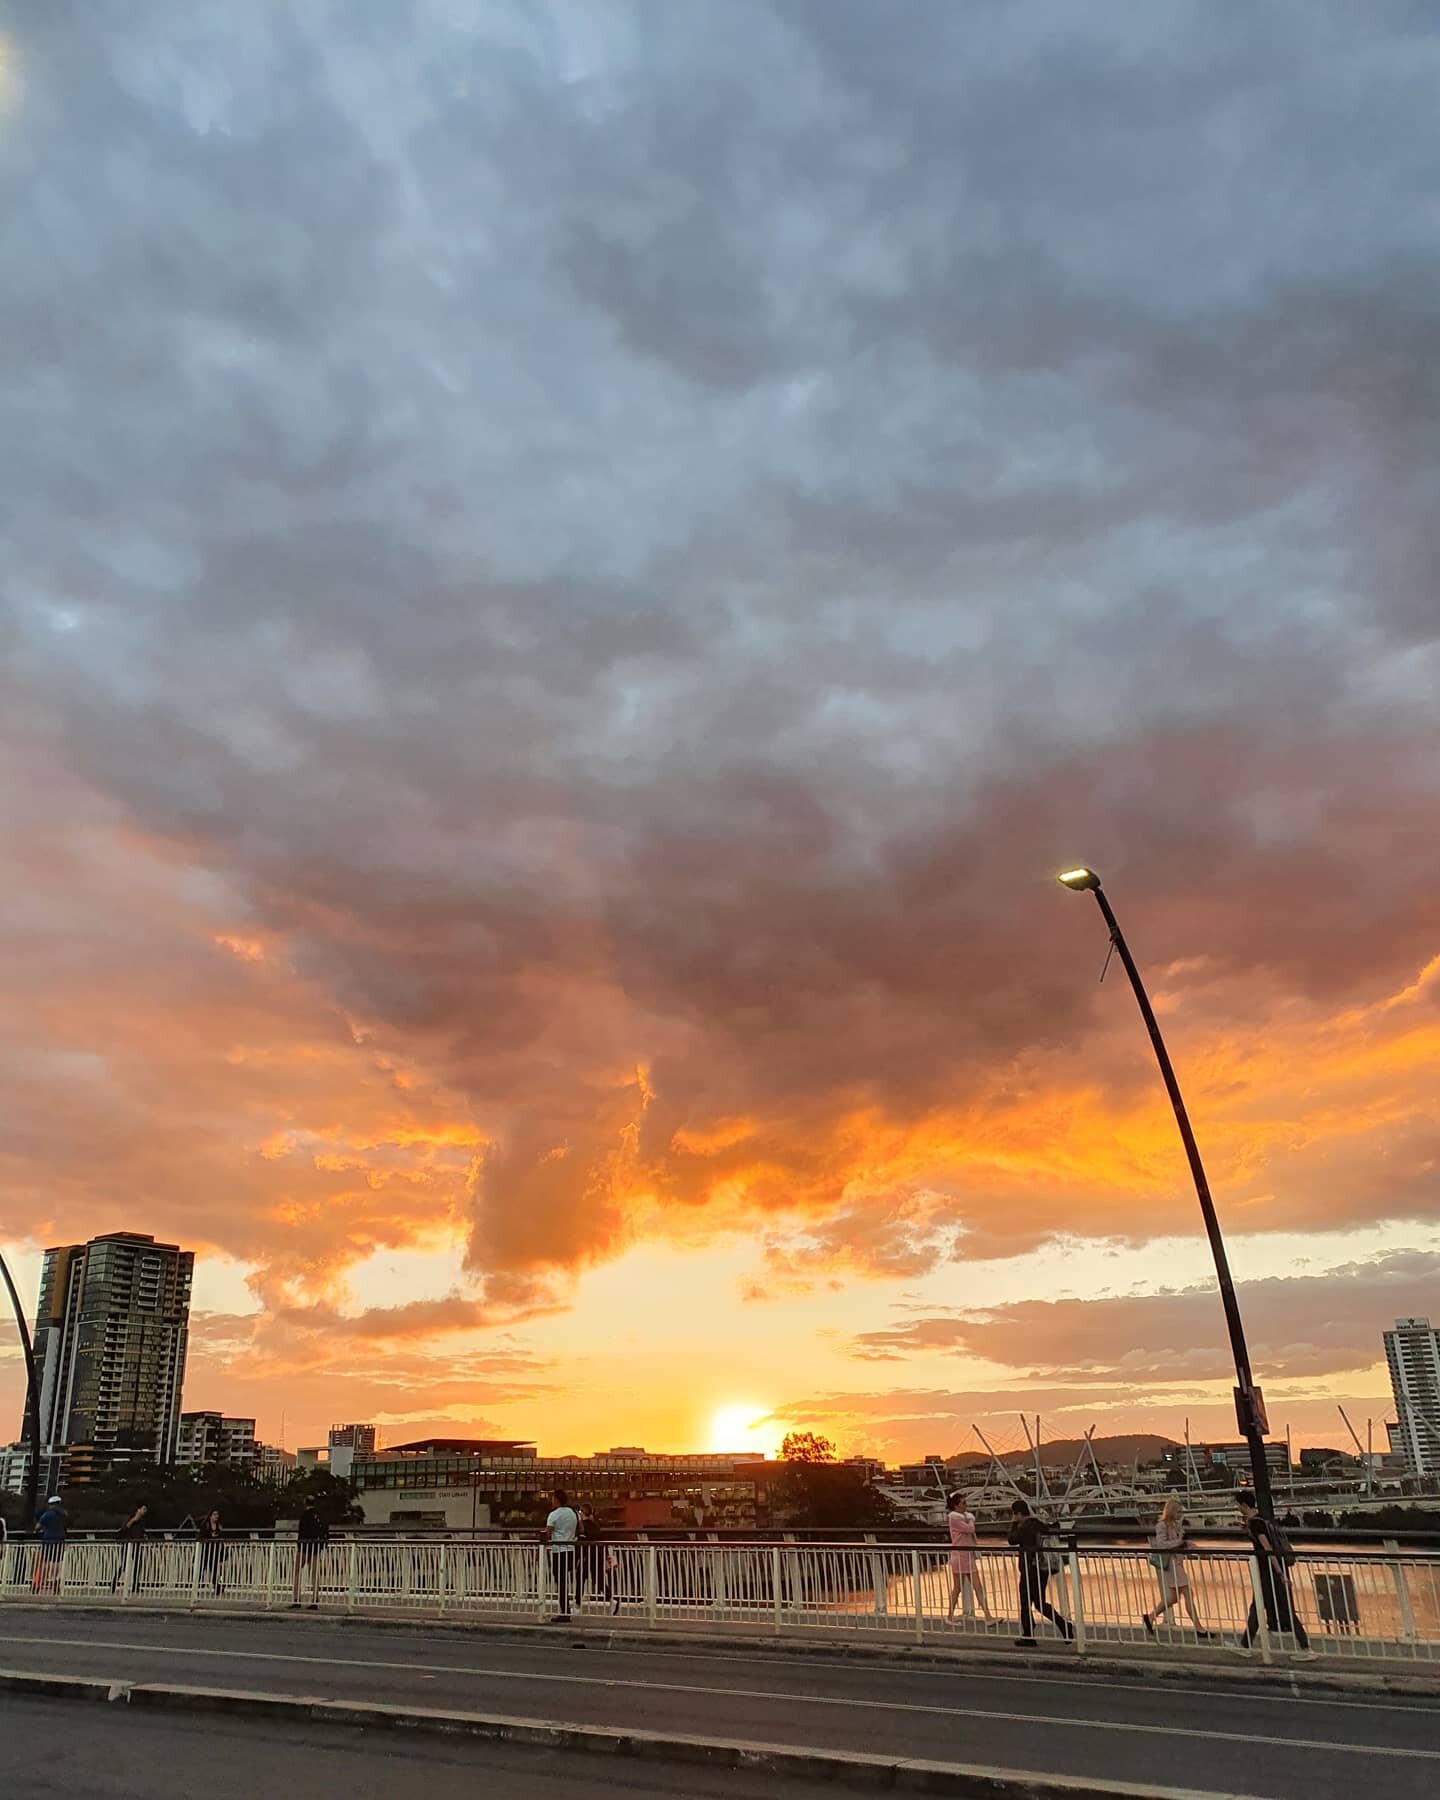 City Sunsets &amp; where to find them.. 😍.
.
The walk along Victoria Bridge with views across to Southbank &amp; @qagoma is all the more pleasant this time of year🔥.

.
Certainly a beautiful way to end a busy day don't you think?

.
📸@discoverbris